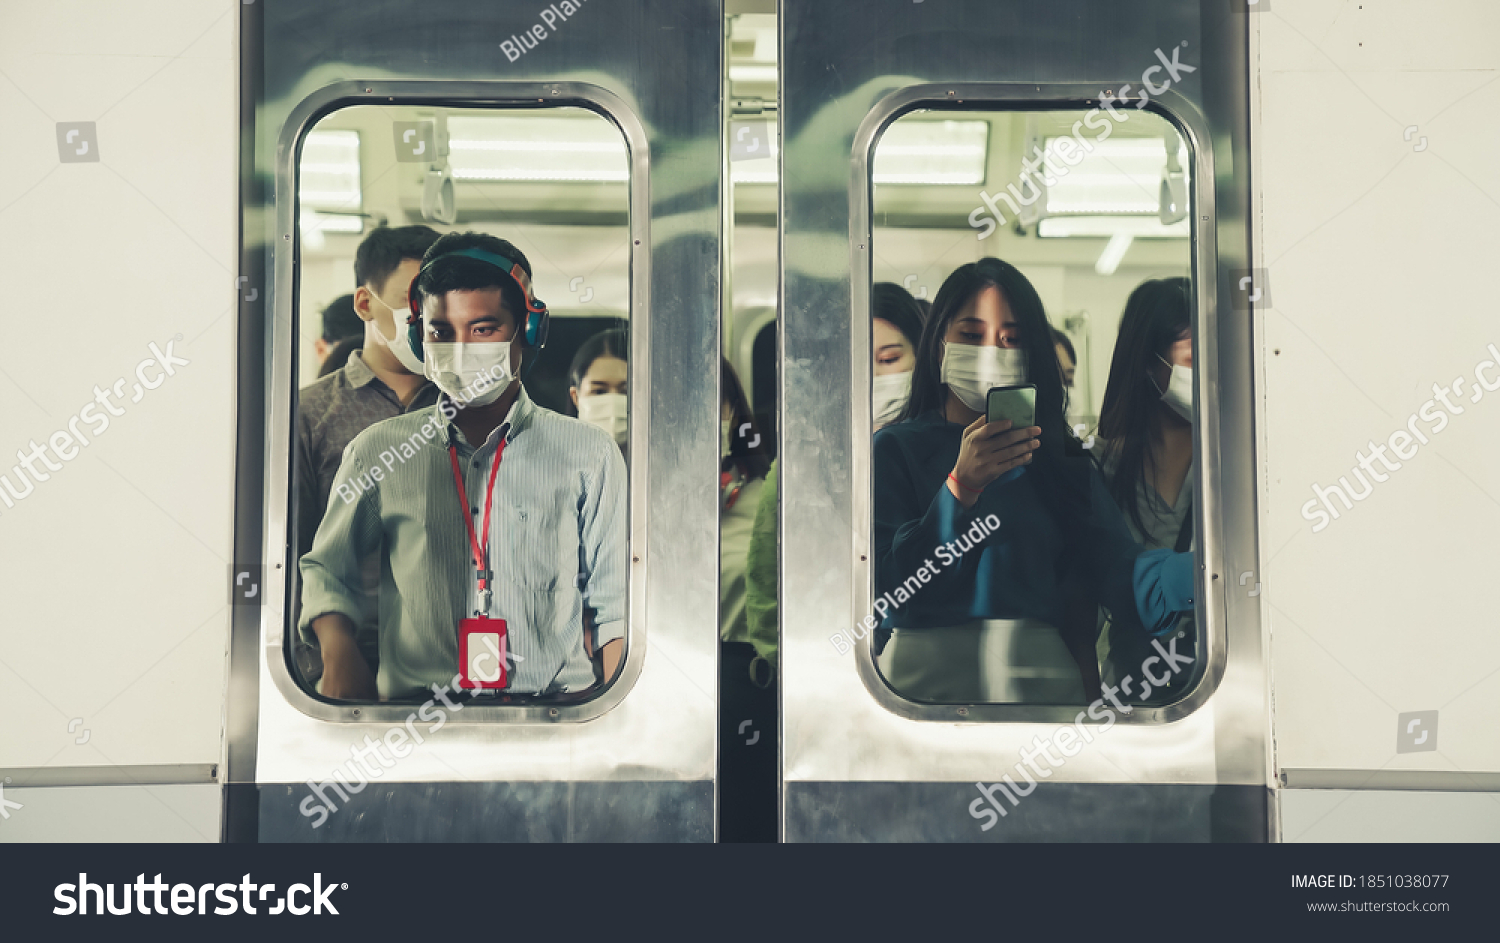 Crowd of people wearing face mask on a crowded public subway train travel . Coronavirus disease or COVID 19 pandemic outbreak and urban lifestyle problem in rush hour concept . #1851038077